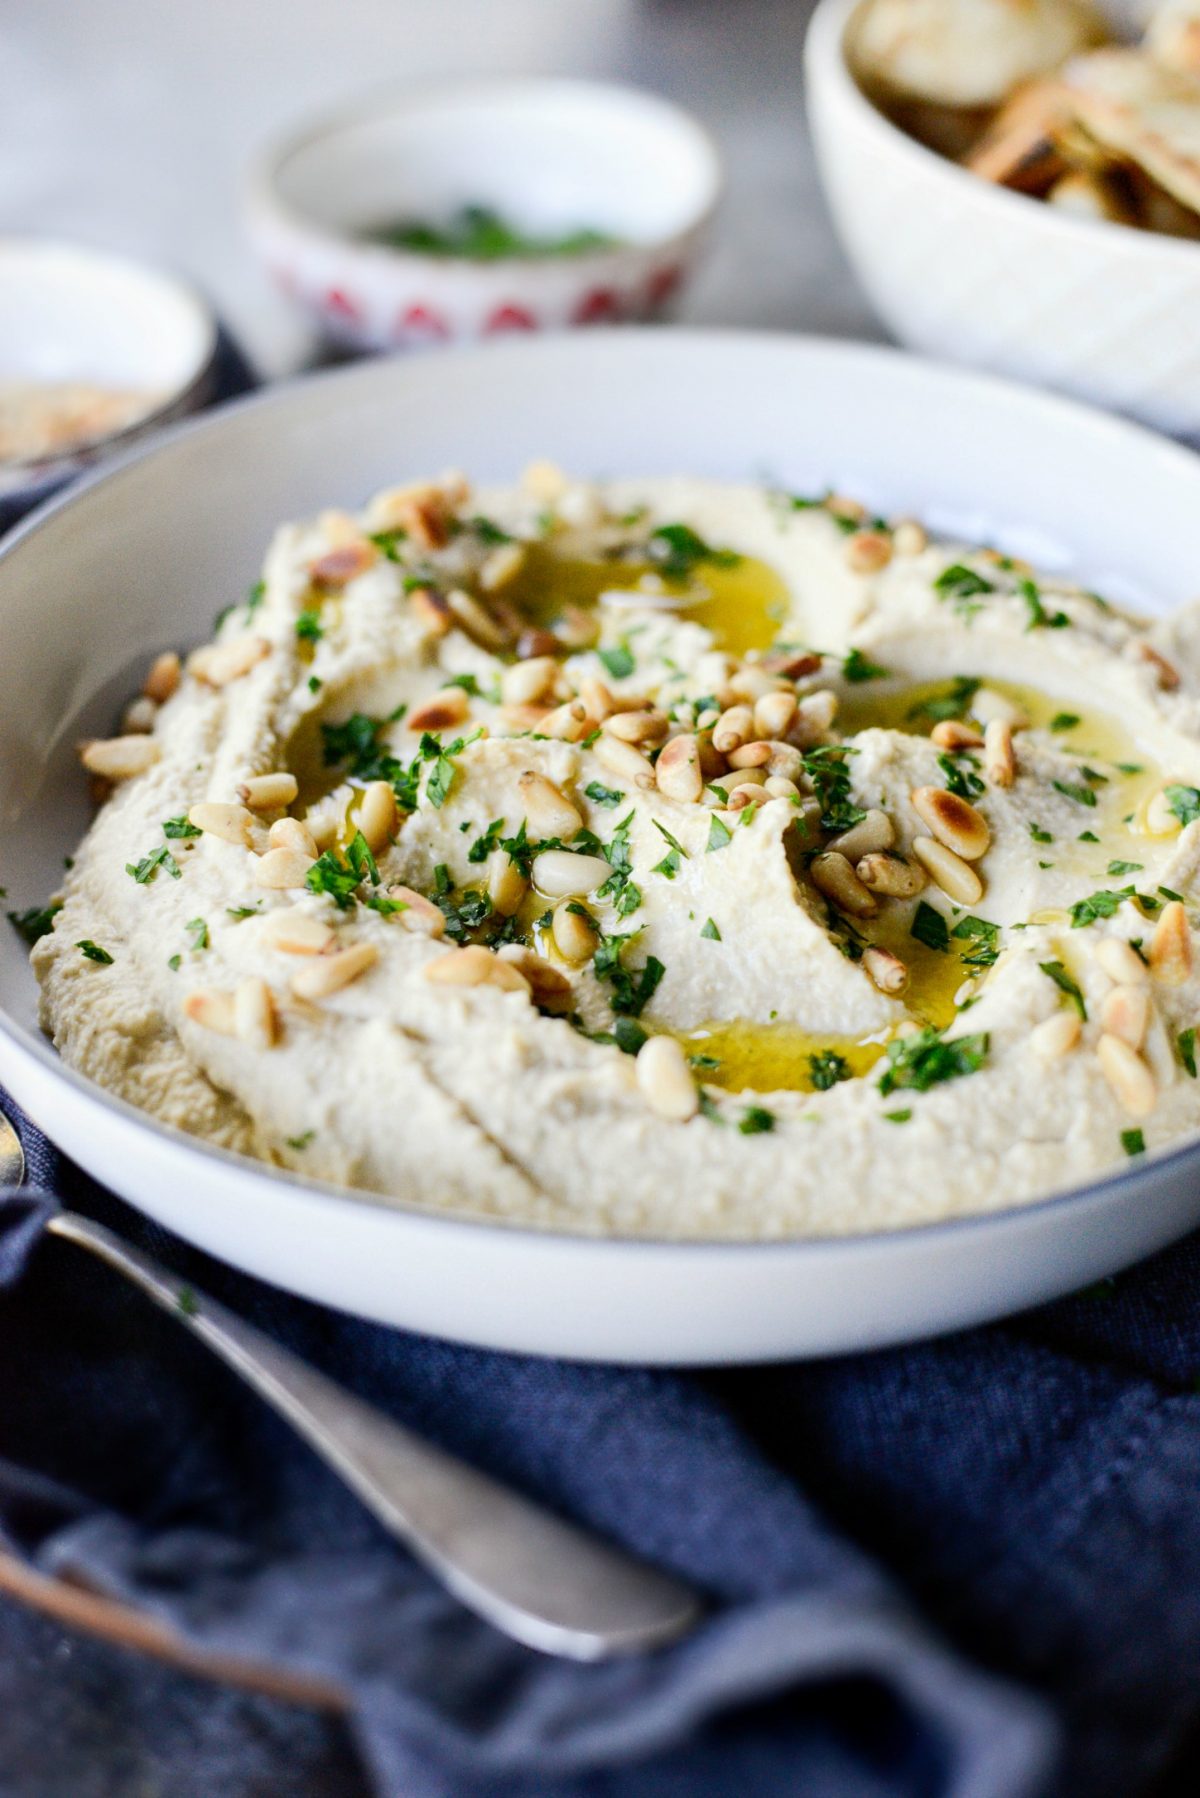 Hummus Recipe with Toasted Pine Nuts l SimplyScratch.com